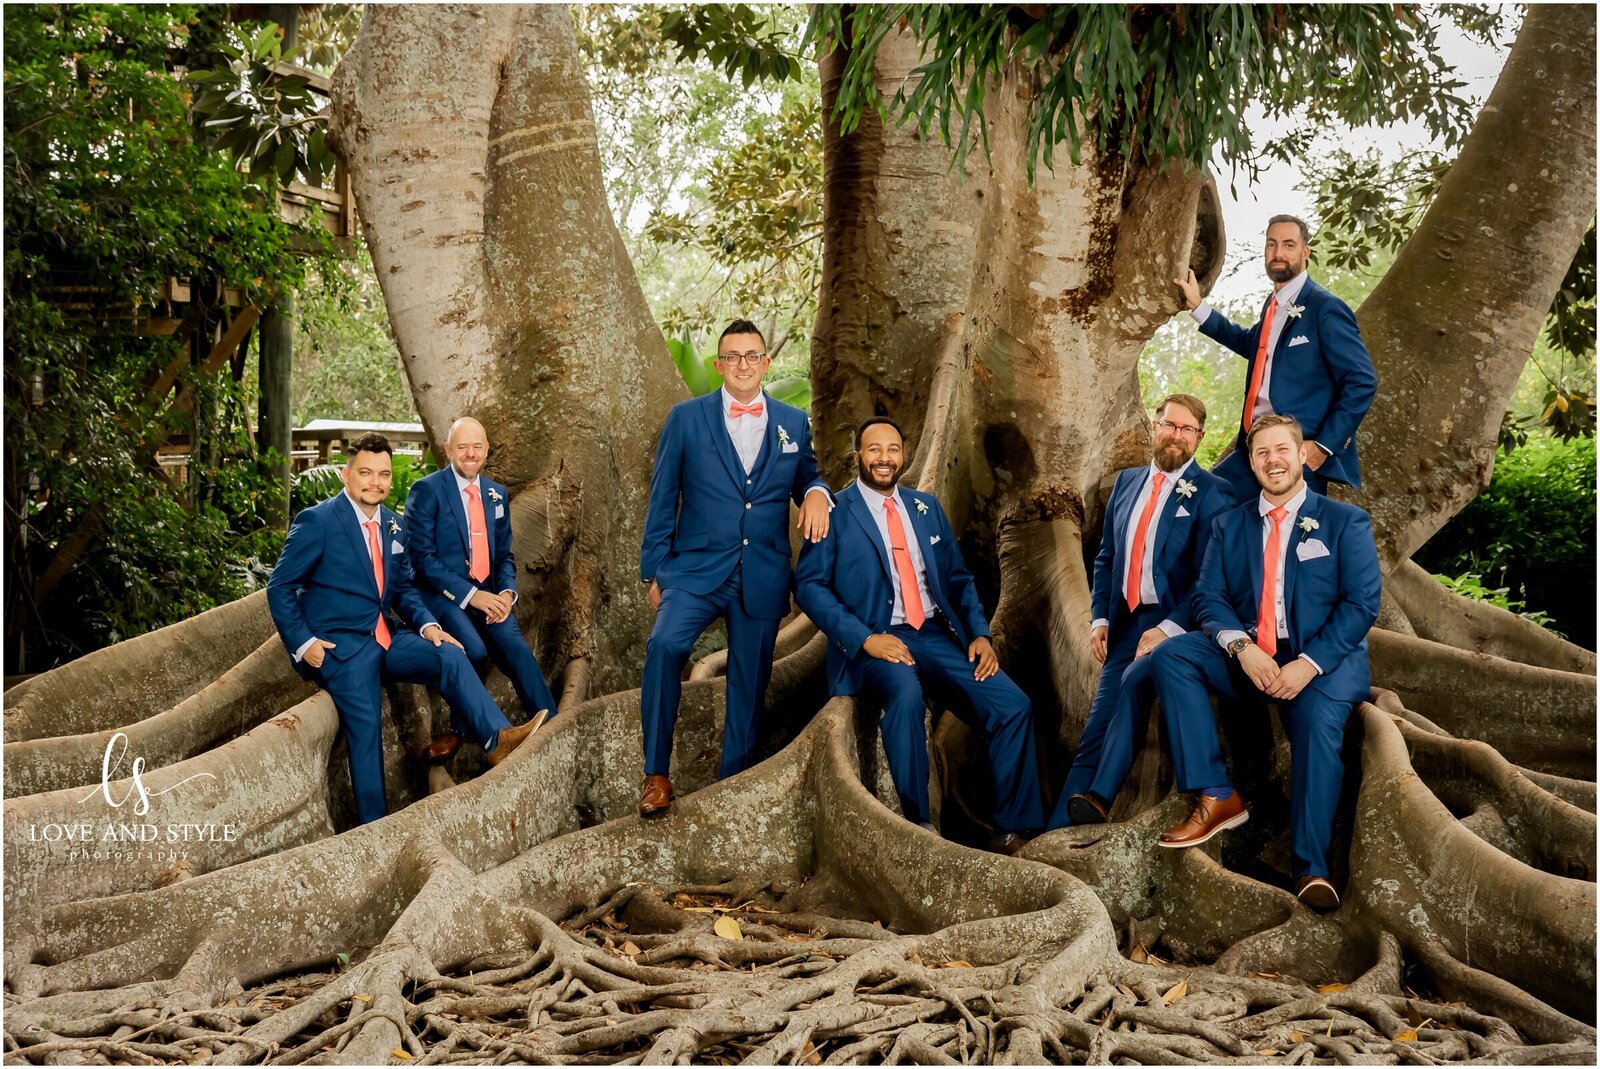 Groom with his groomsmen at Selby gardens in Sarasota, Fl